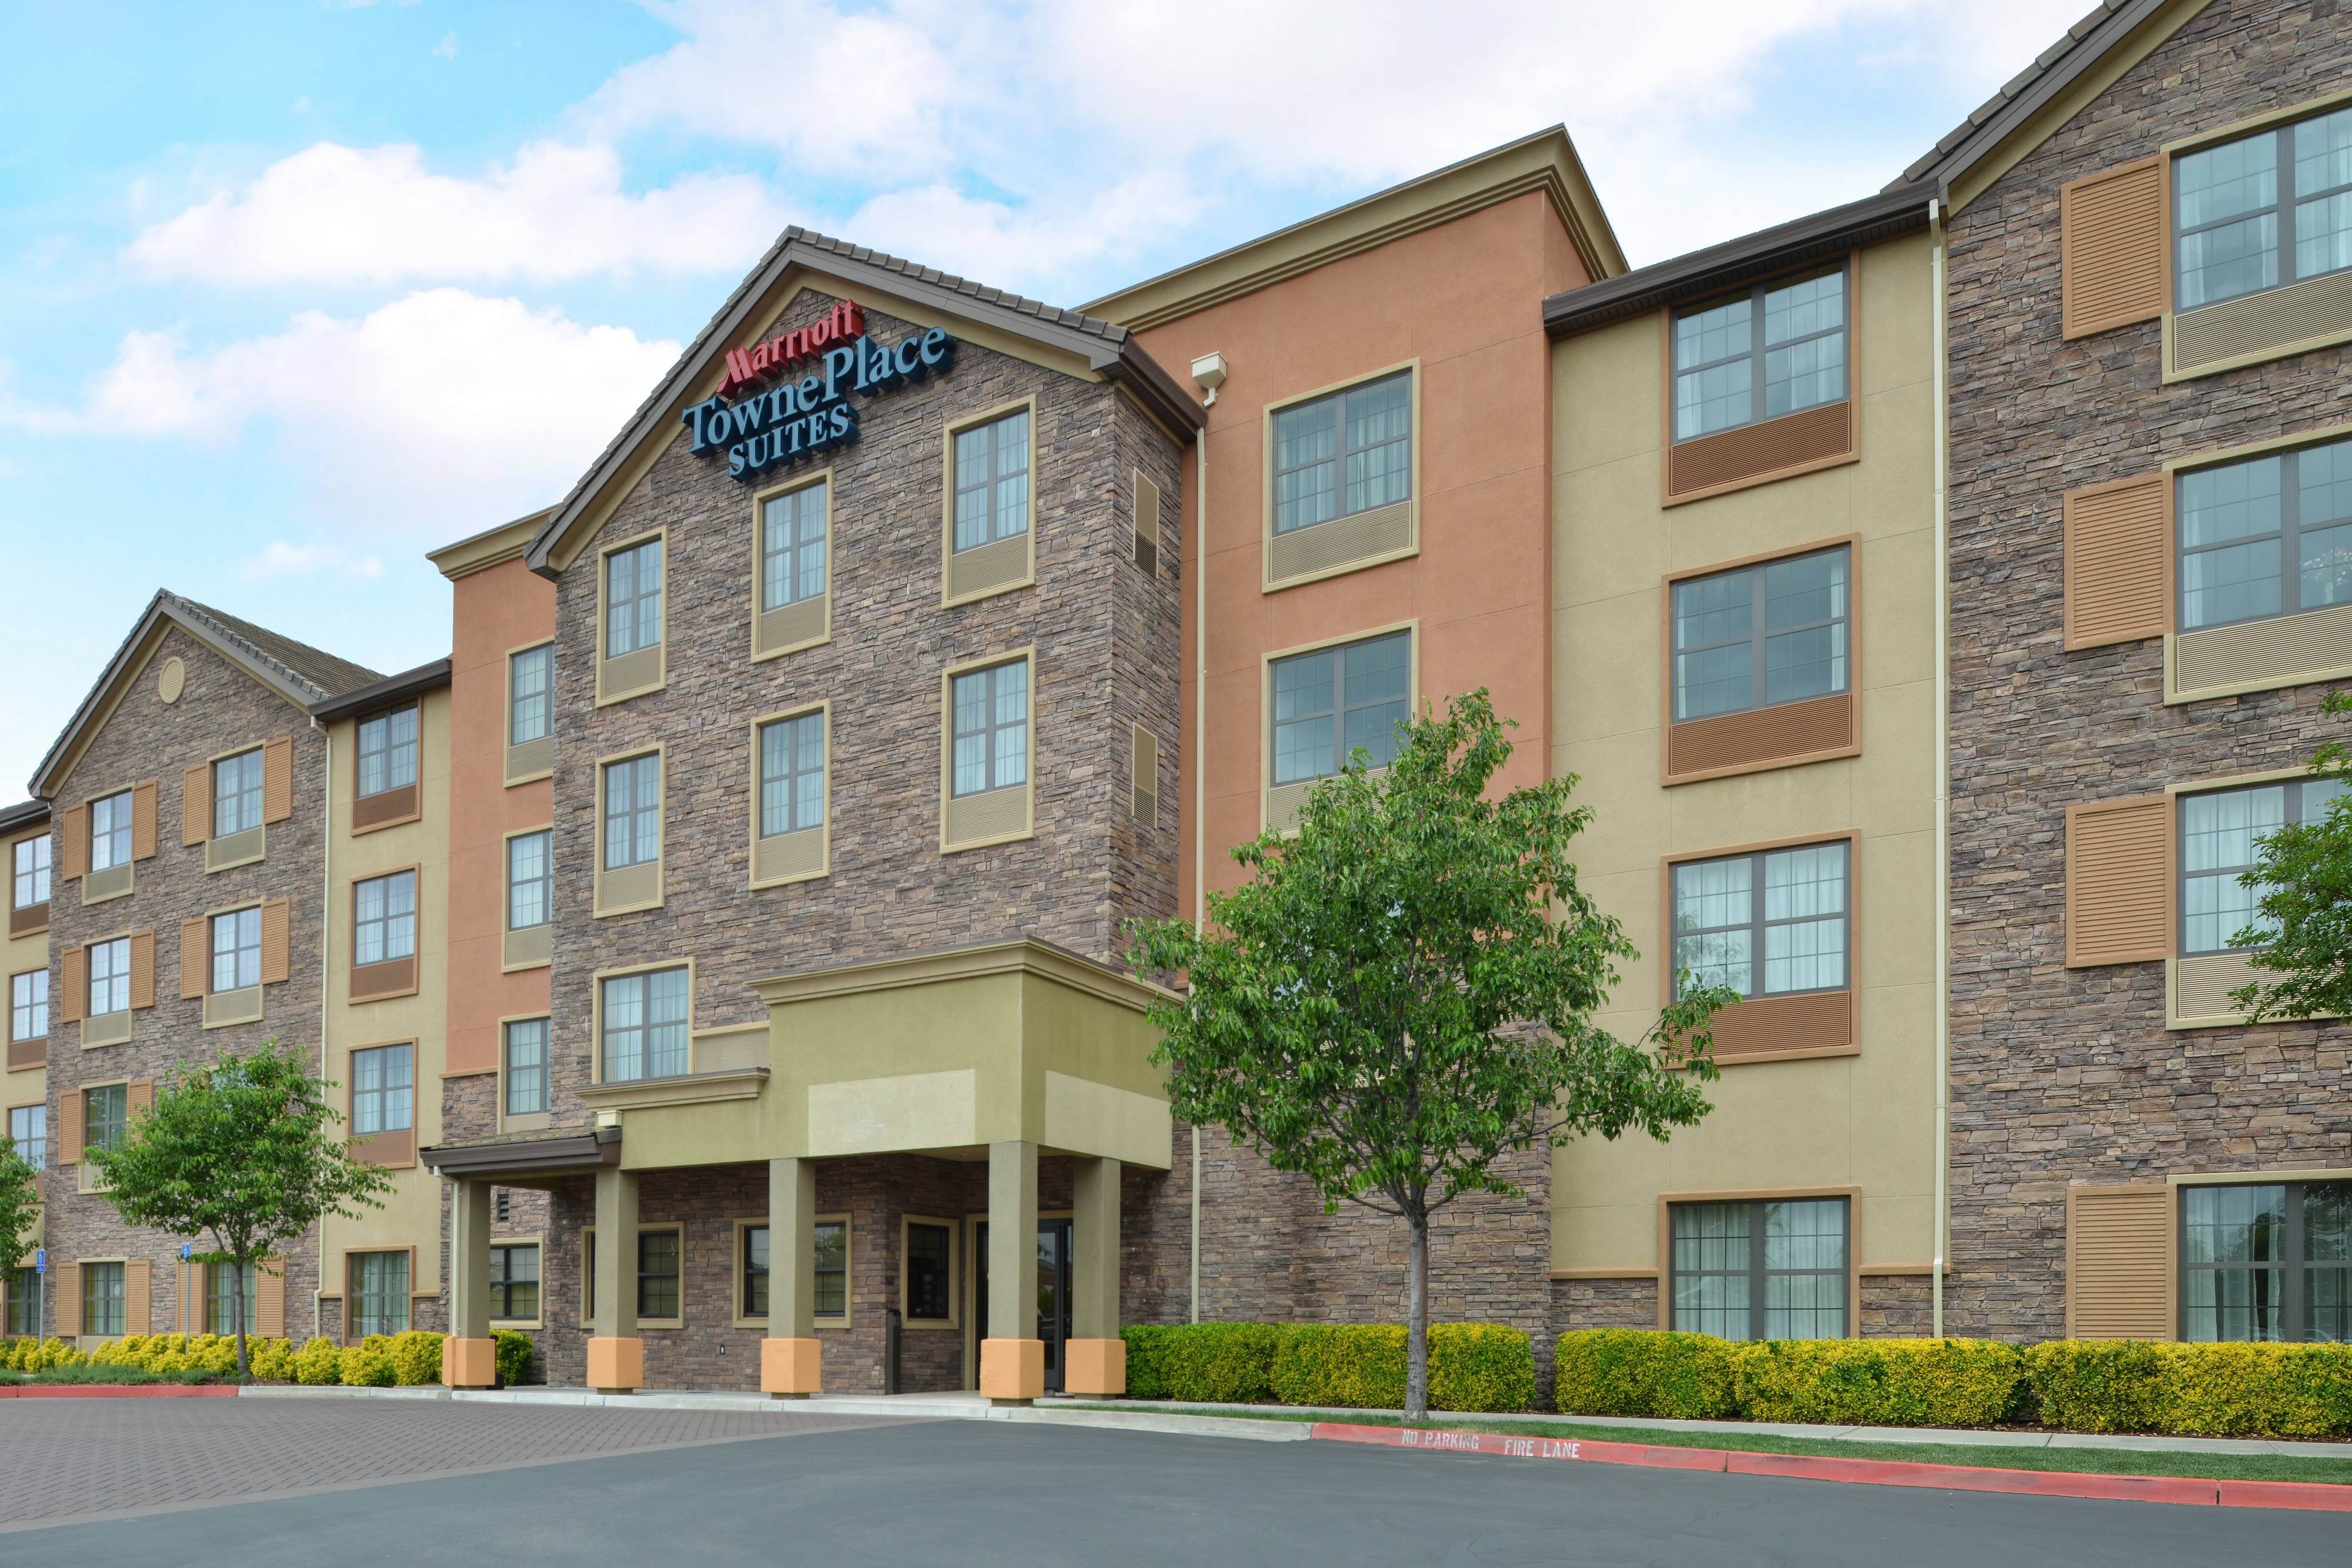 TownePlace Suites Sacramento Roseville image